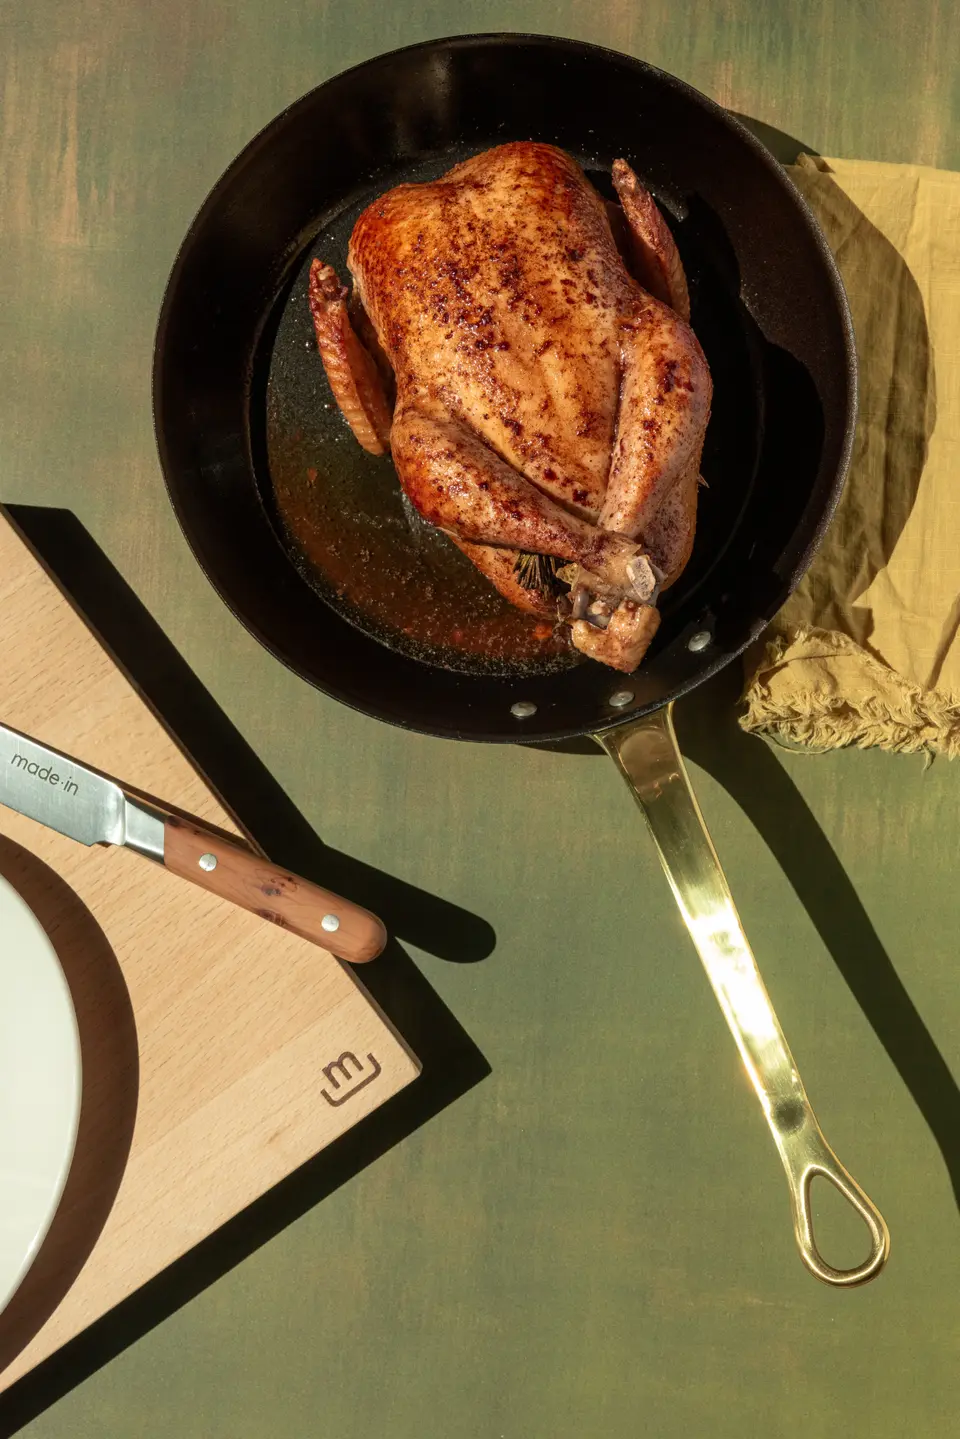 A roasted chicken in a black skillet on a green table next to a brown place setting with a knife and fork.